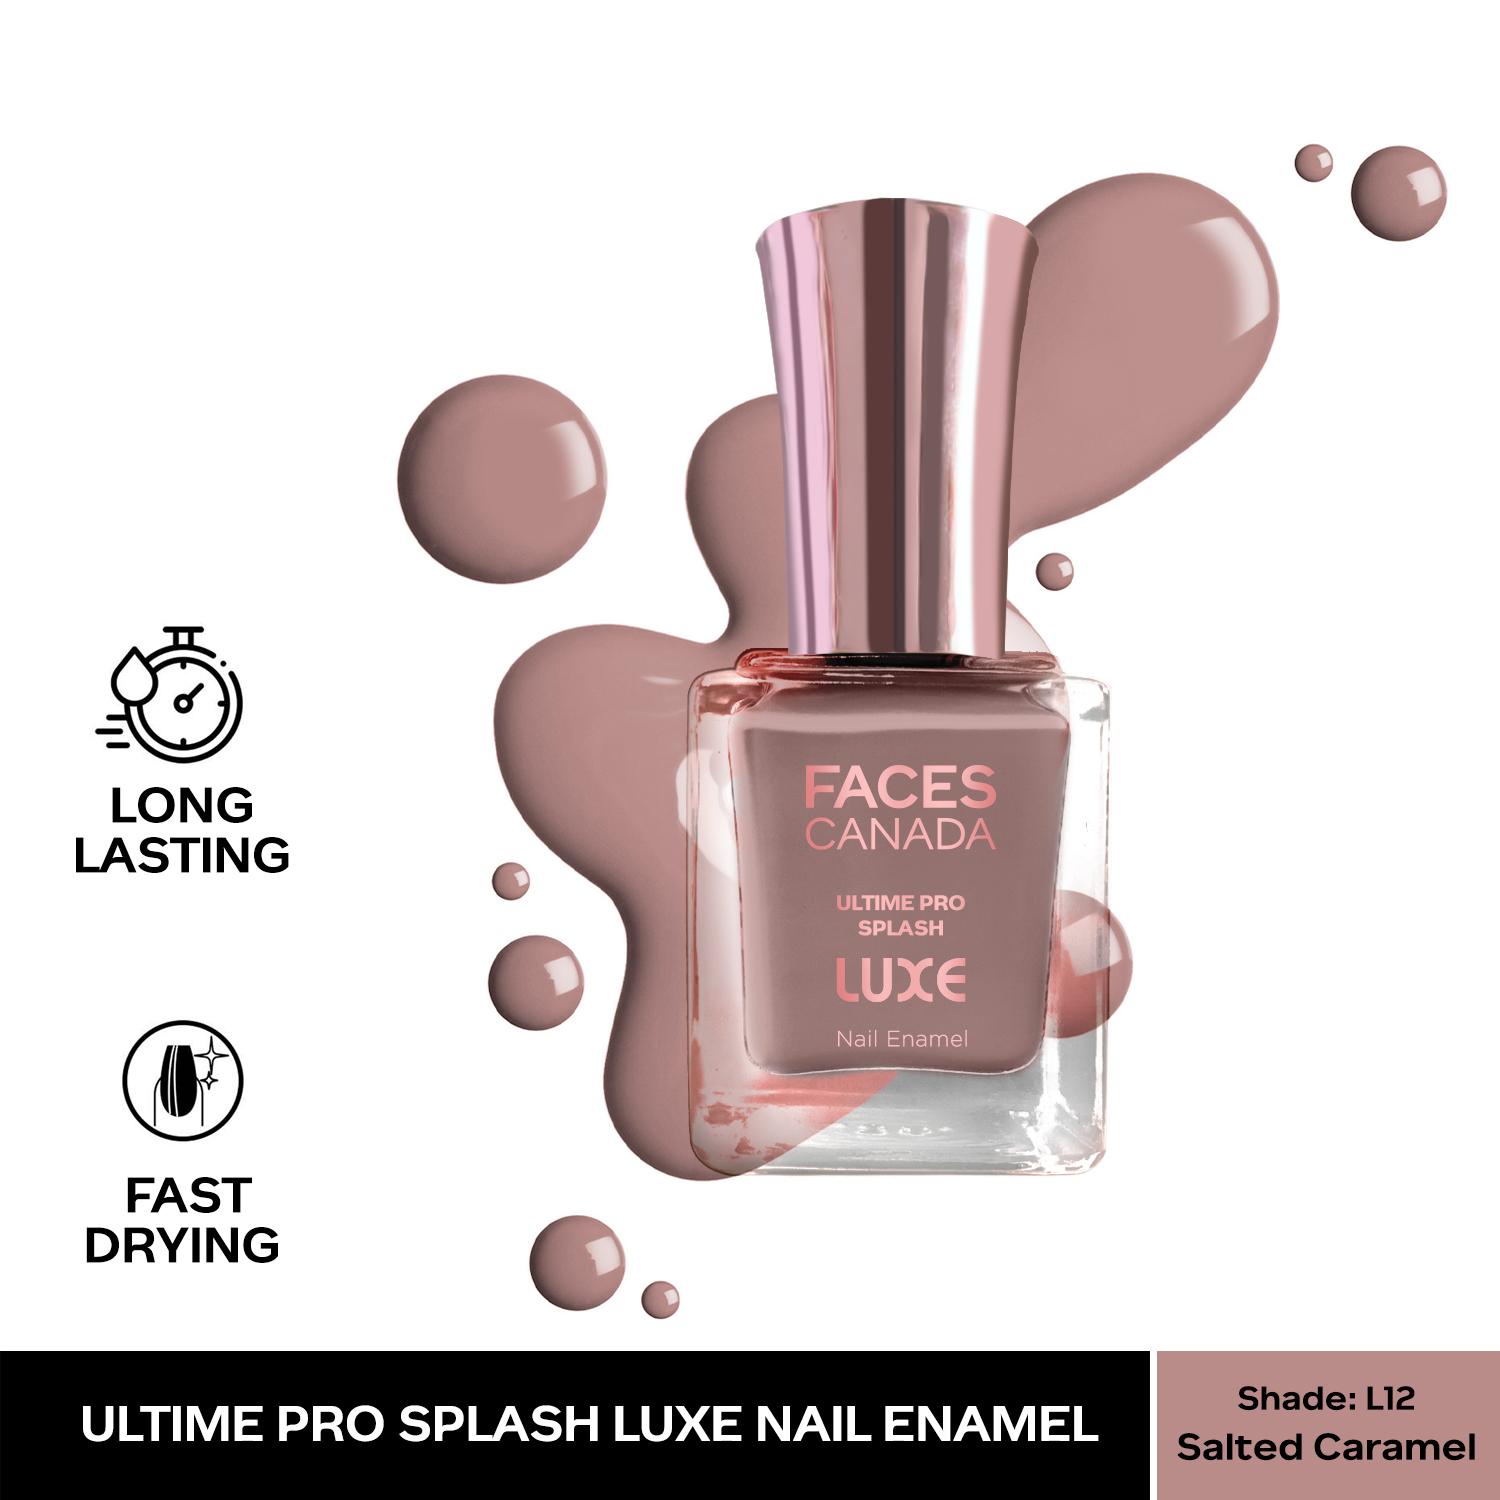 Faces Canada | Faces Canada Ultime Pro Splash Luxe Nail Enamel - Salted Caramel (L12), Glossy Finish (12 ml)